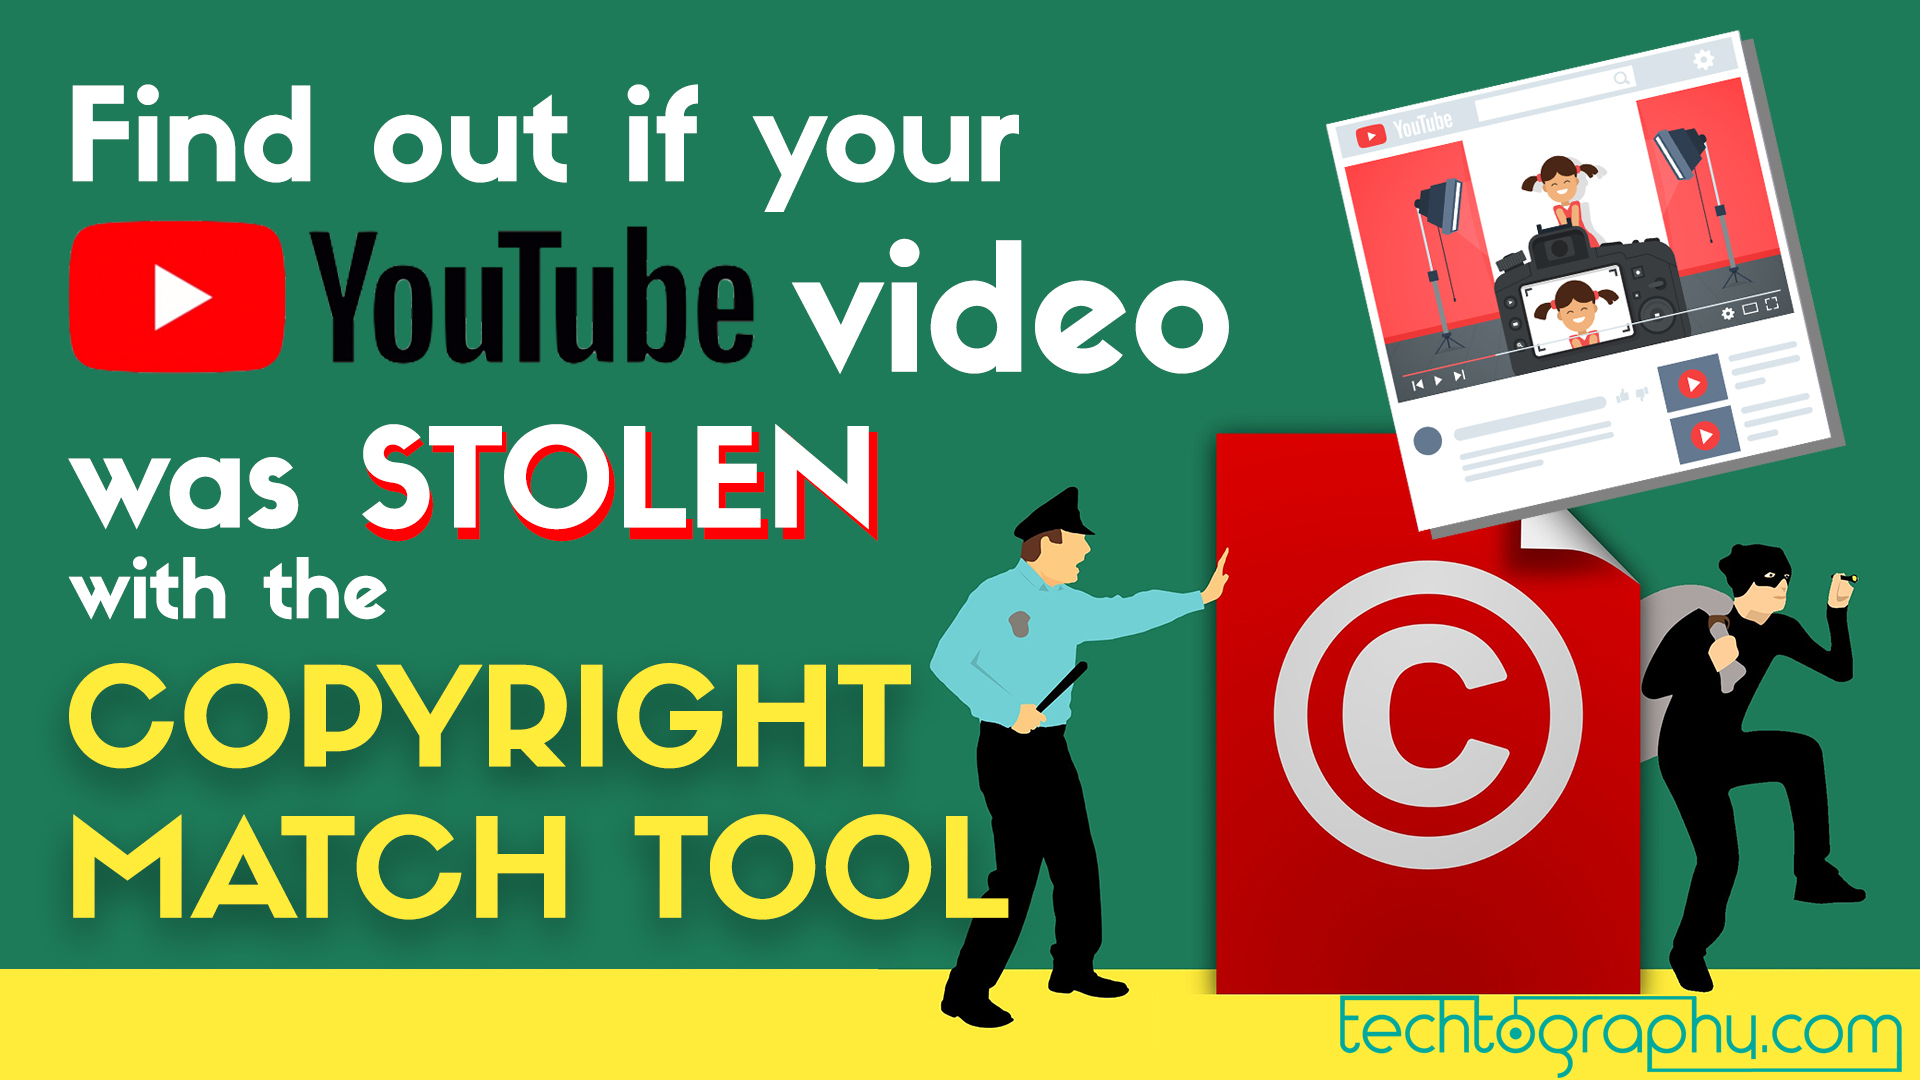 Find Out if Your Video Was Stolen with the YouTube Copyright Match Tool